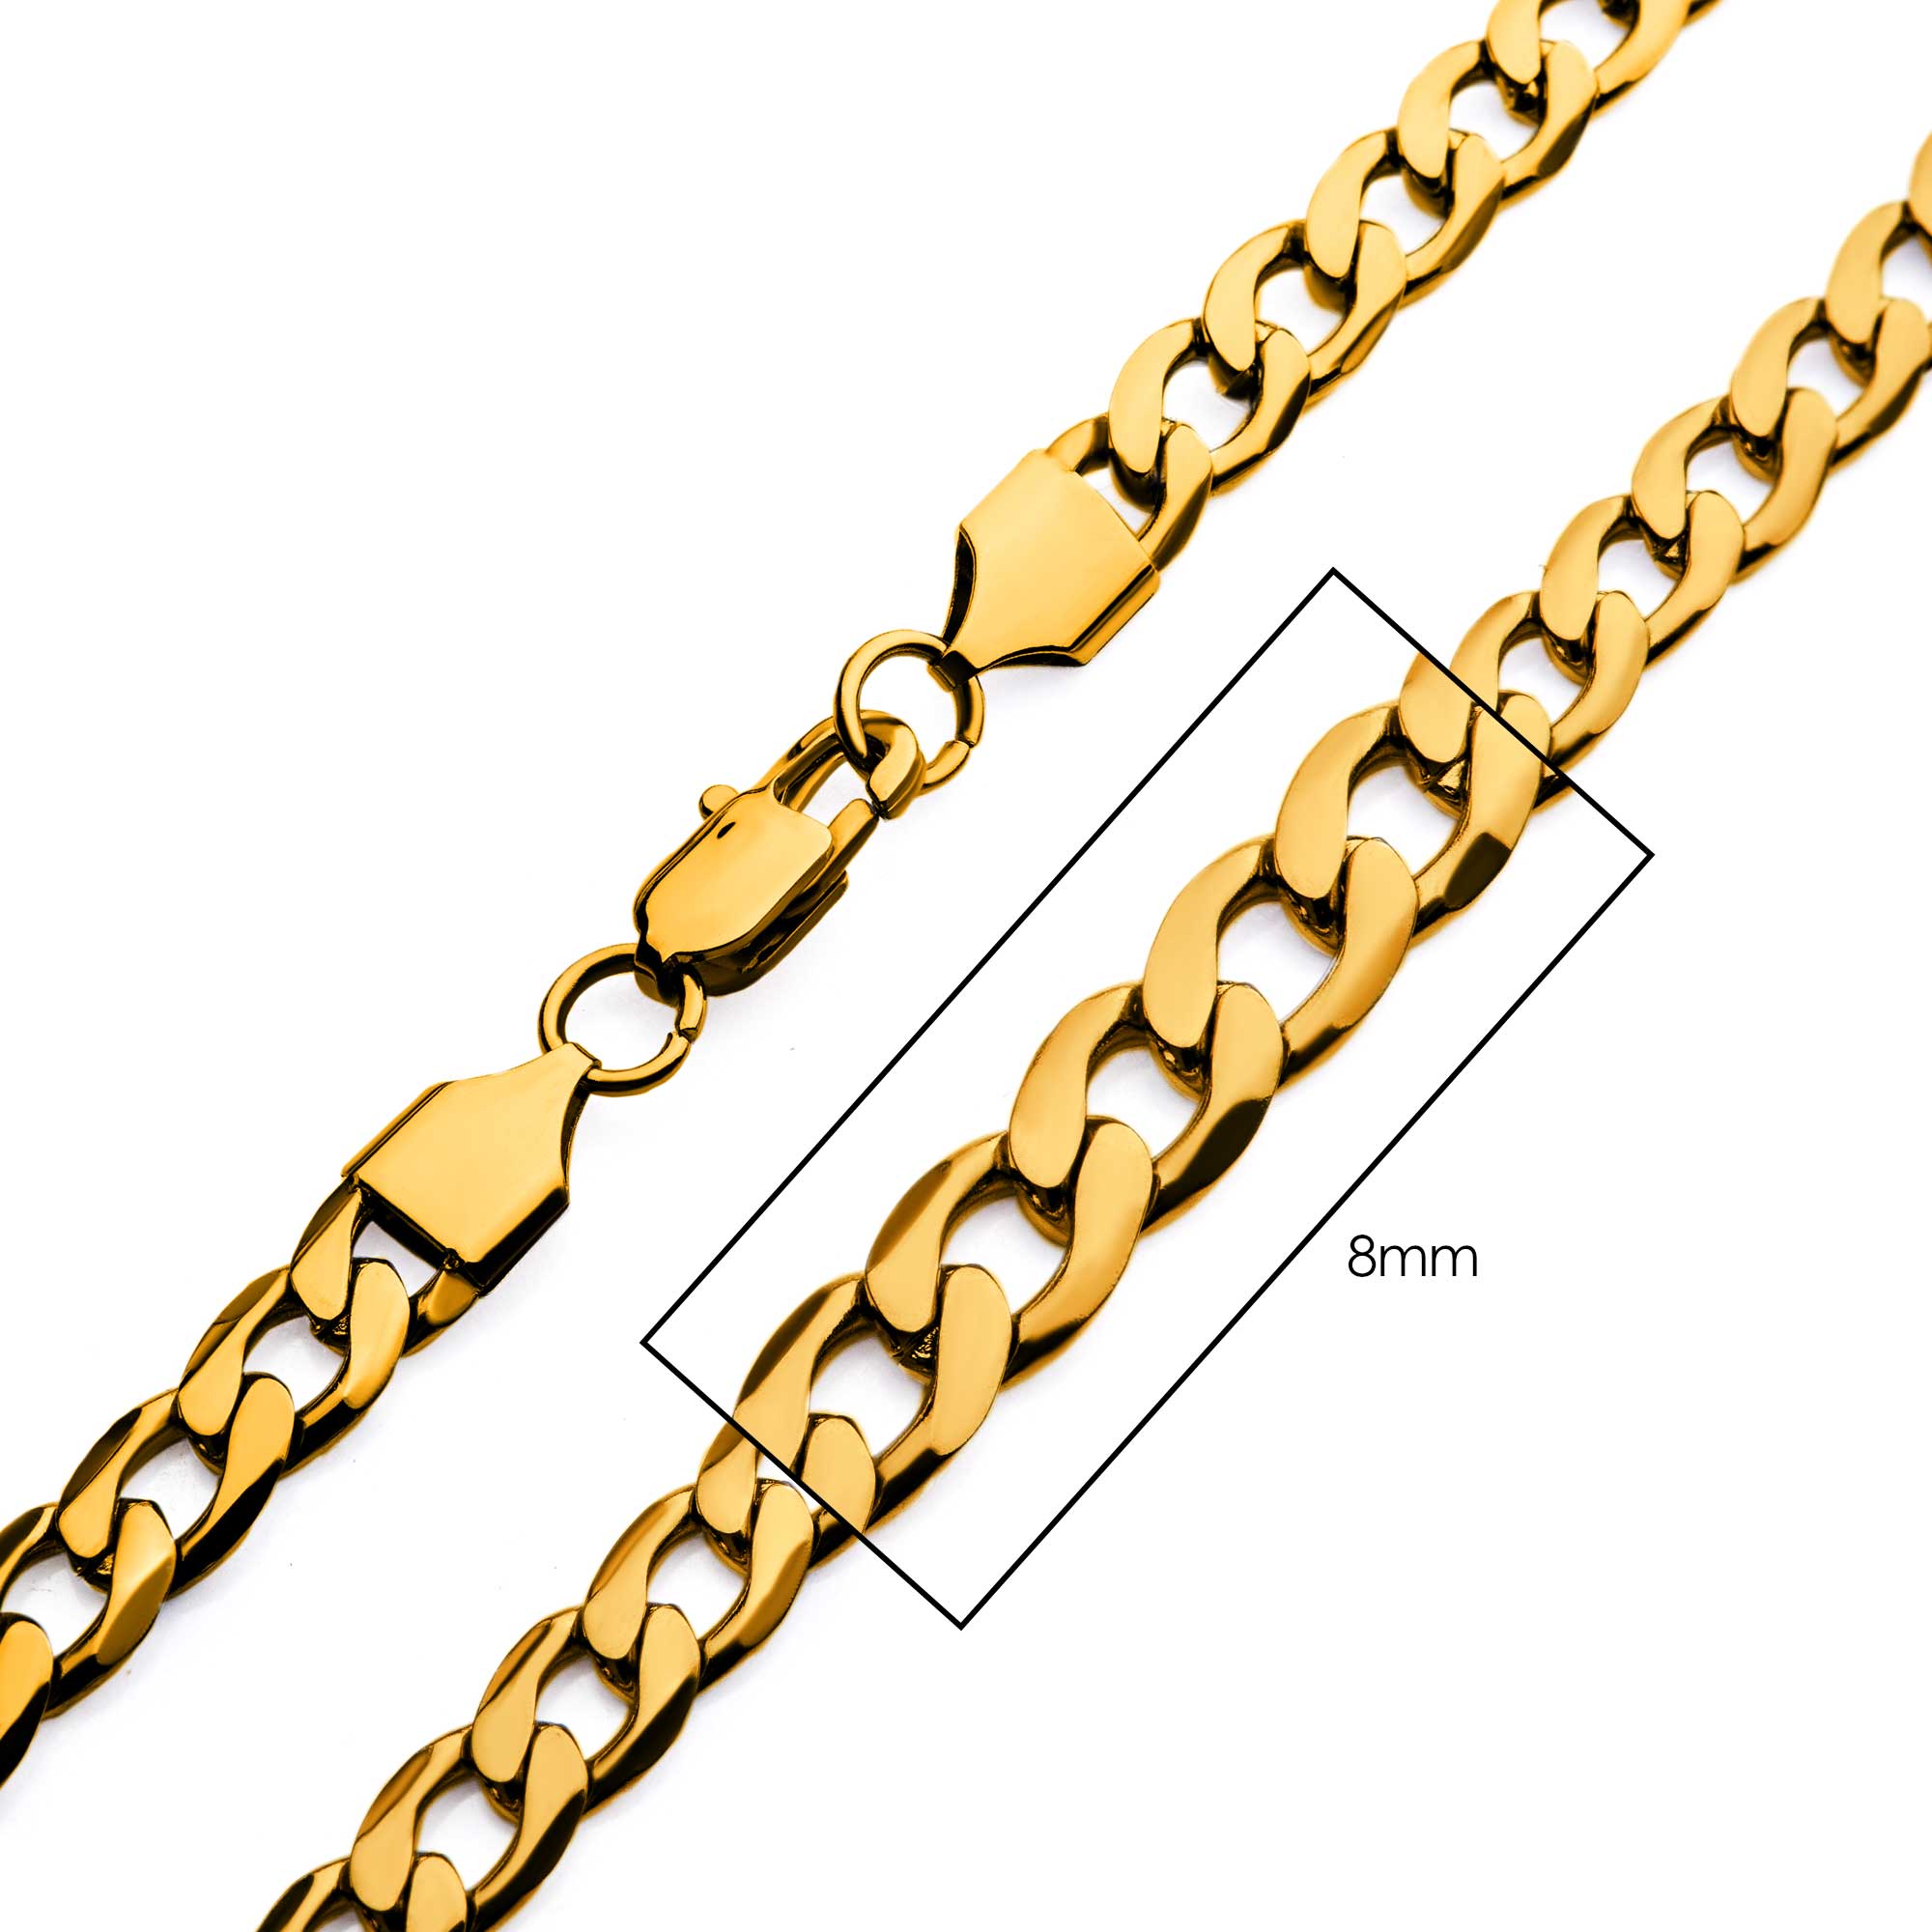 8mm 18K Gold Plated Bevel Curb Chain Midtown Diamonds Reno, NV